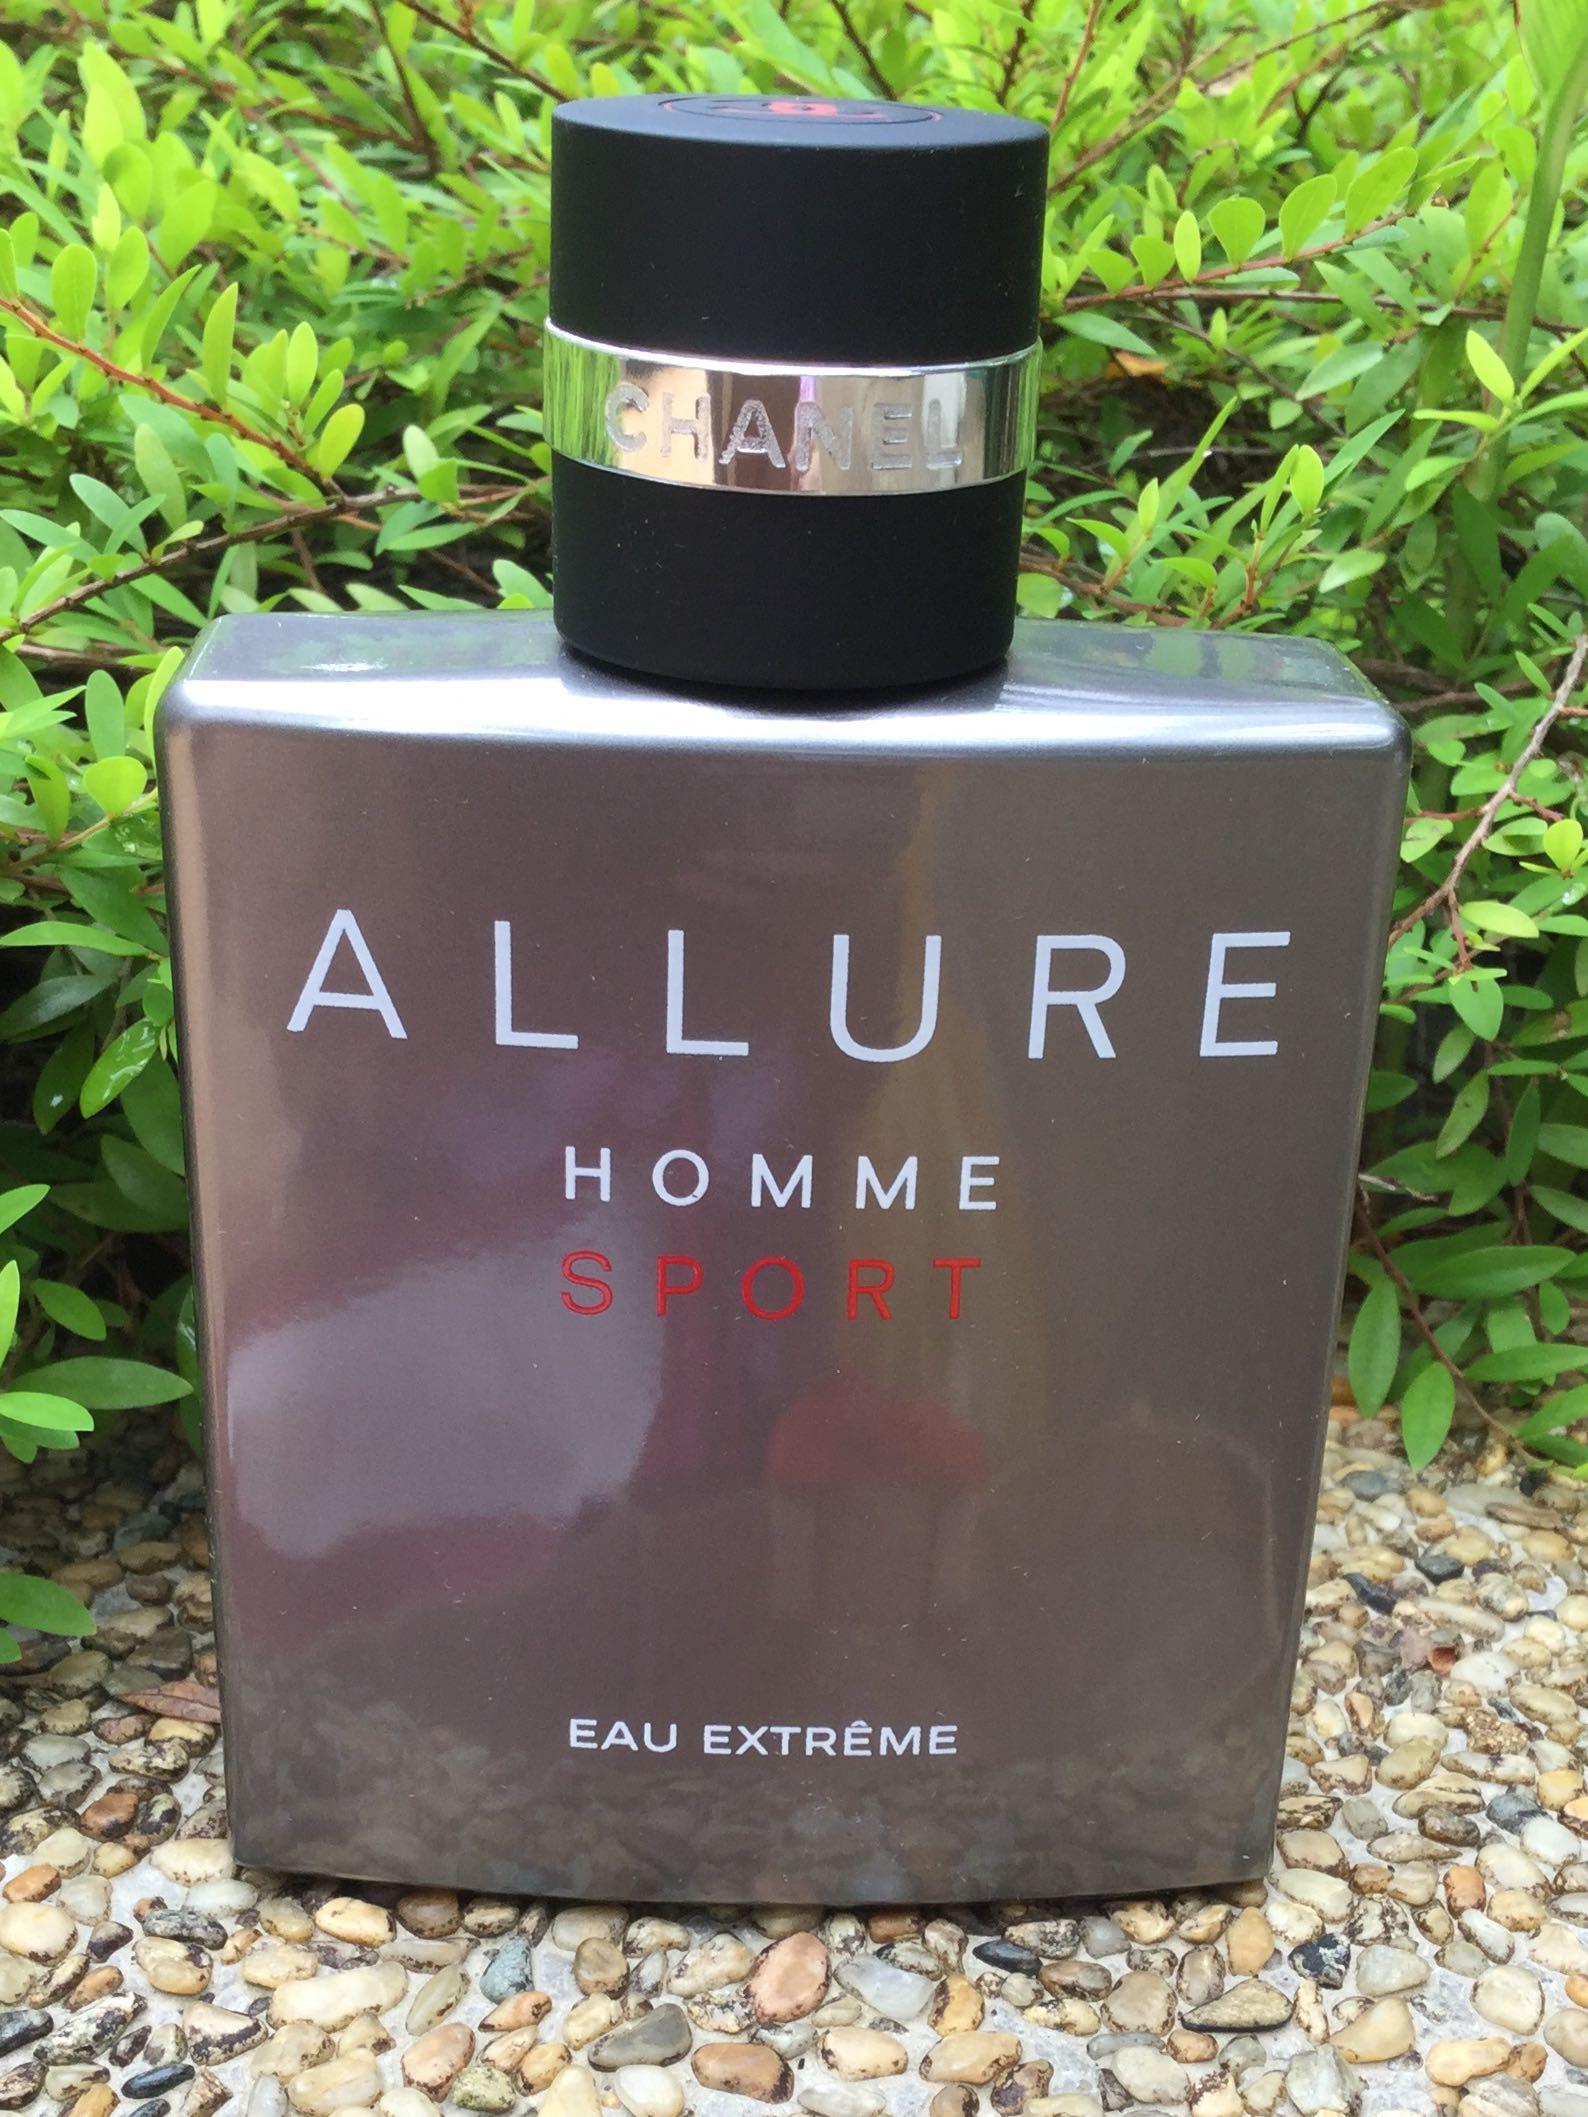  Allure Homme Sport Eau Extreme/Chanel EDP Spray 5.0 oz (150  ml) (m) : Beauty & Personal Care